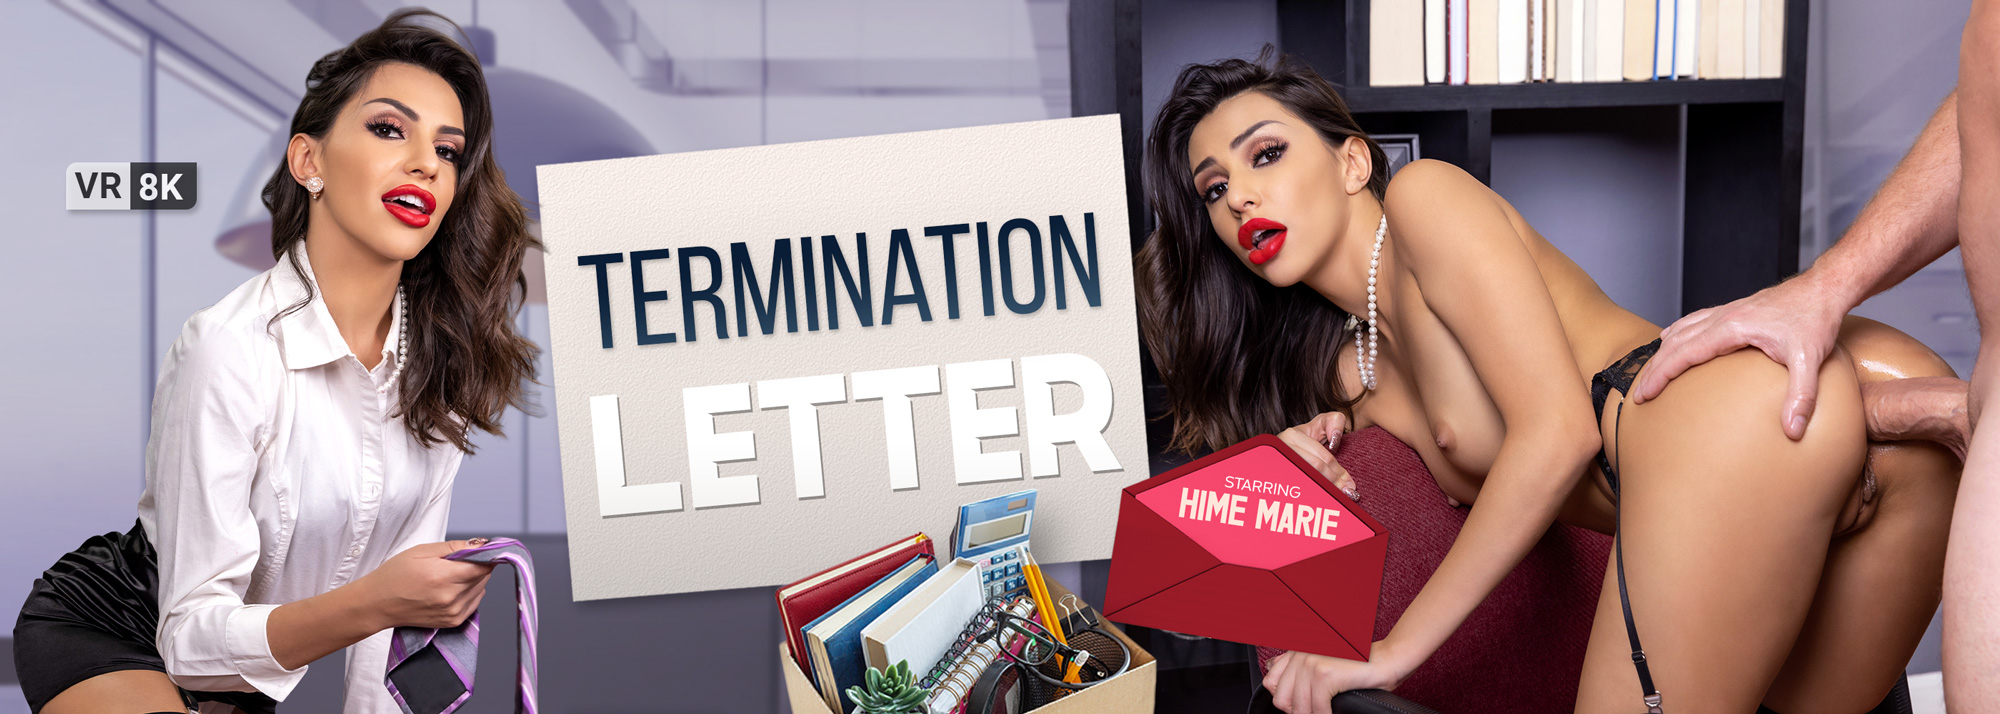 Termination Letter - VR Porn Video, Starring: Hime Marie